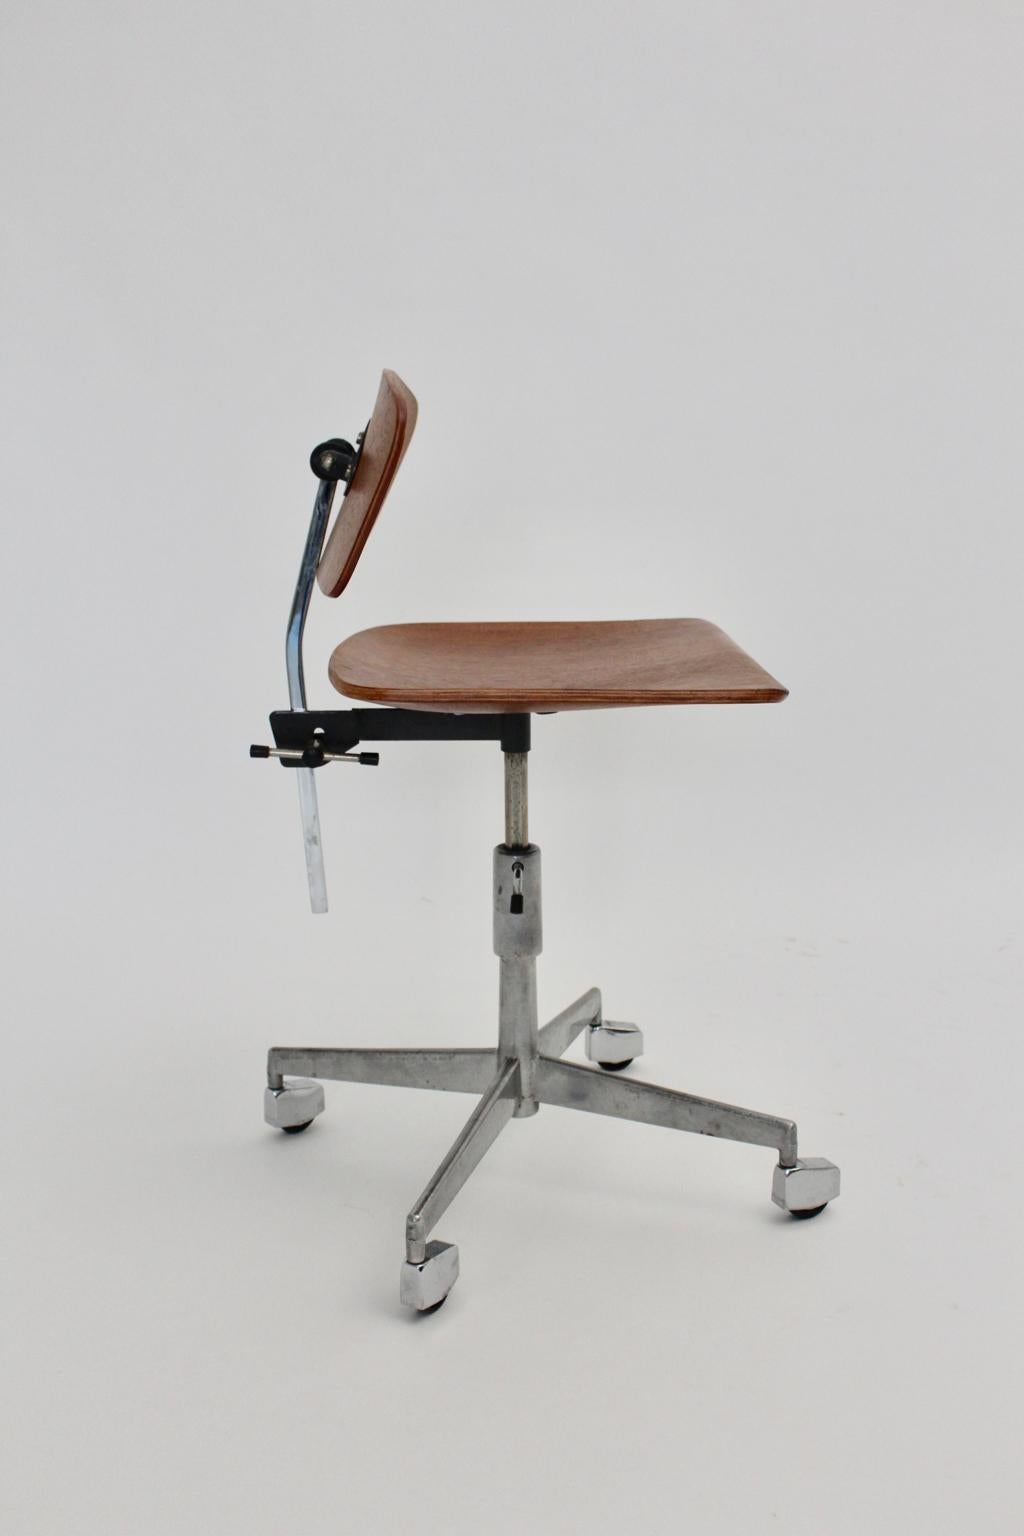 Mid-Century Modern vintage desk chair or office chair designed by Jorgen Rasmussen 1950s in Denmark and executed by Labofa.
The chromed metal frame shows four wheels. The seat and the back were made of laminated beech plywood.
Also the desk chair